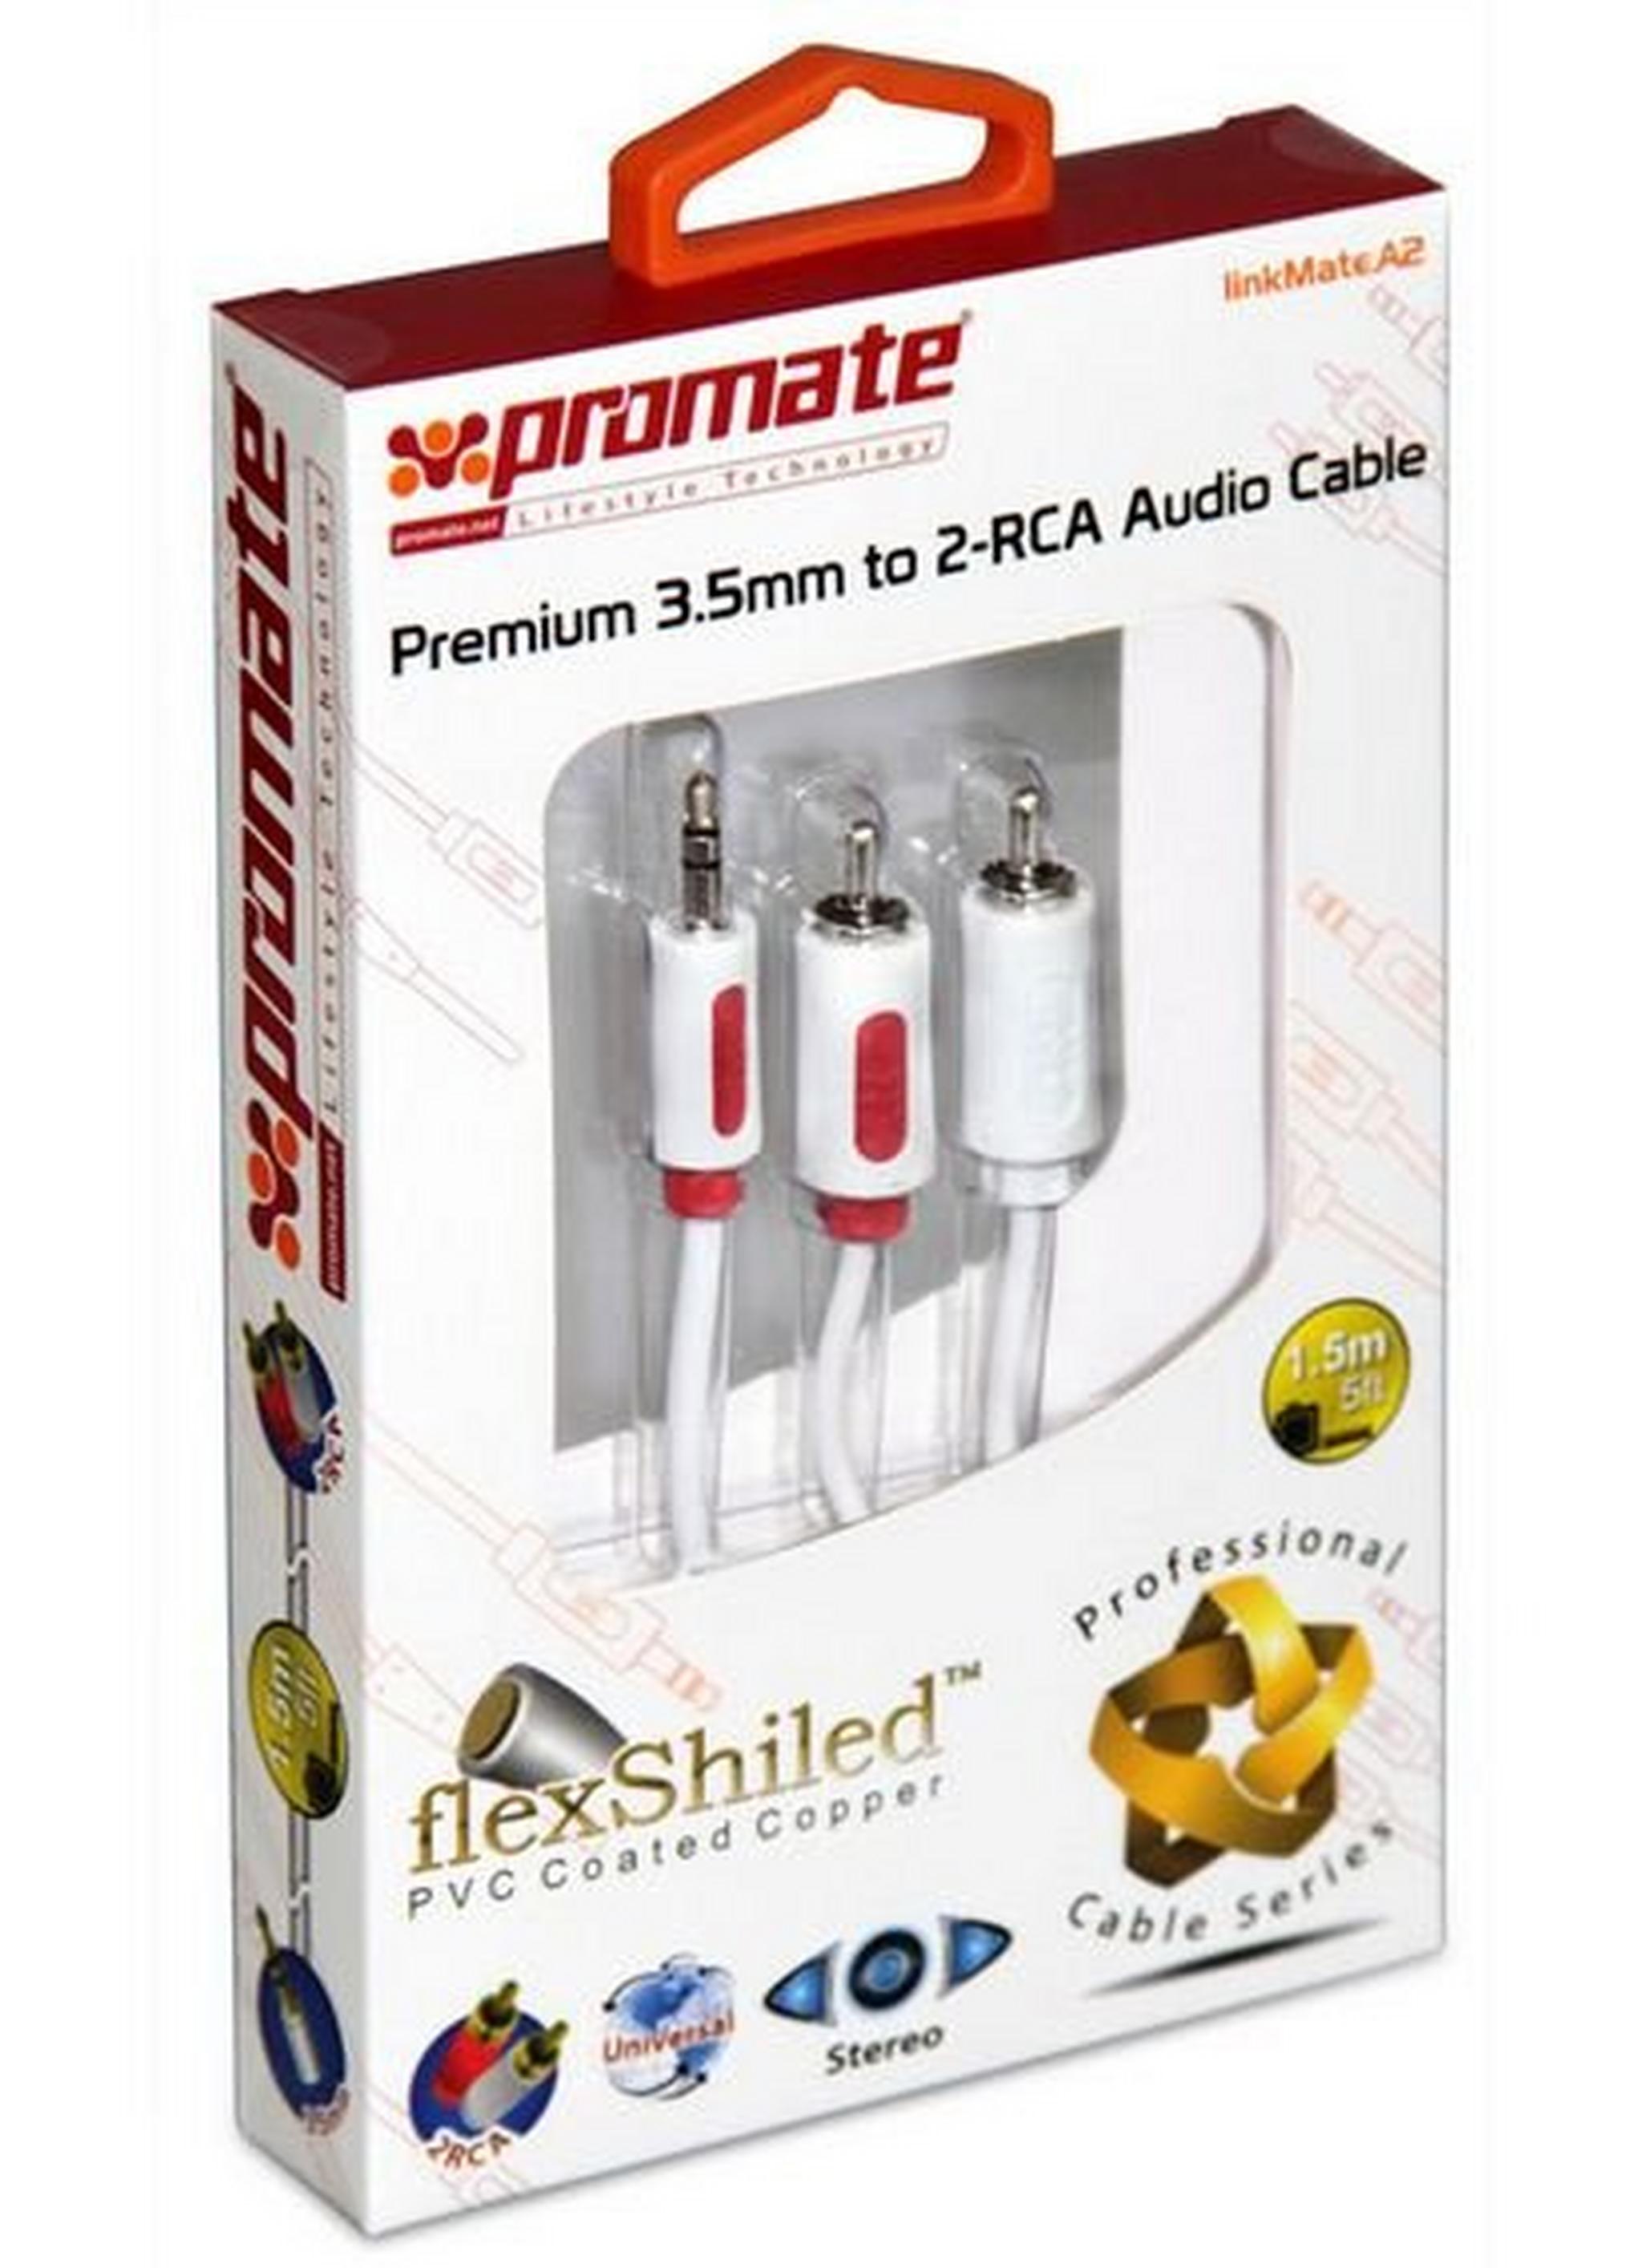 Promate linkMate.A2 Premium 3.5mm to 2-RCA Cable